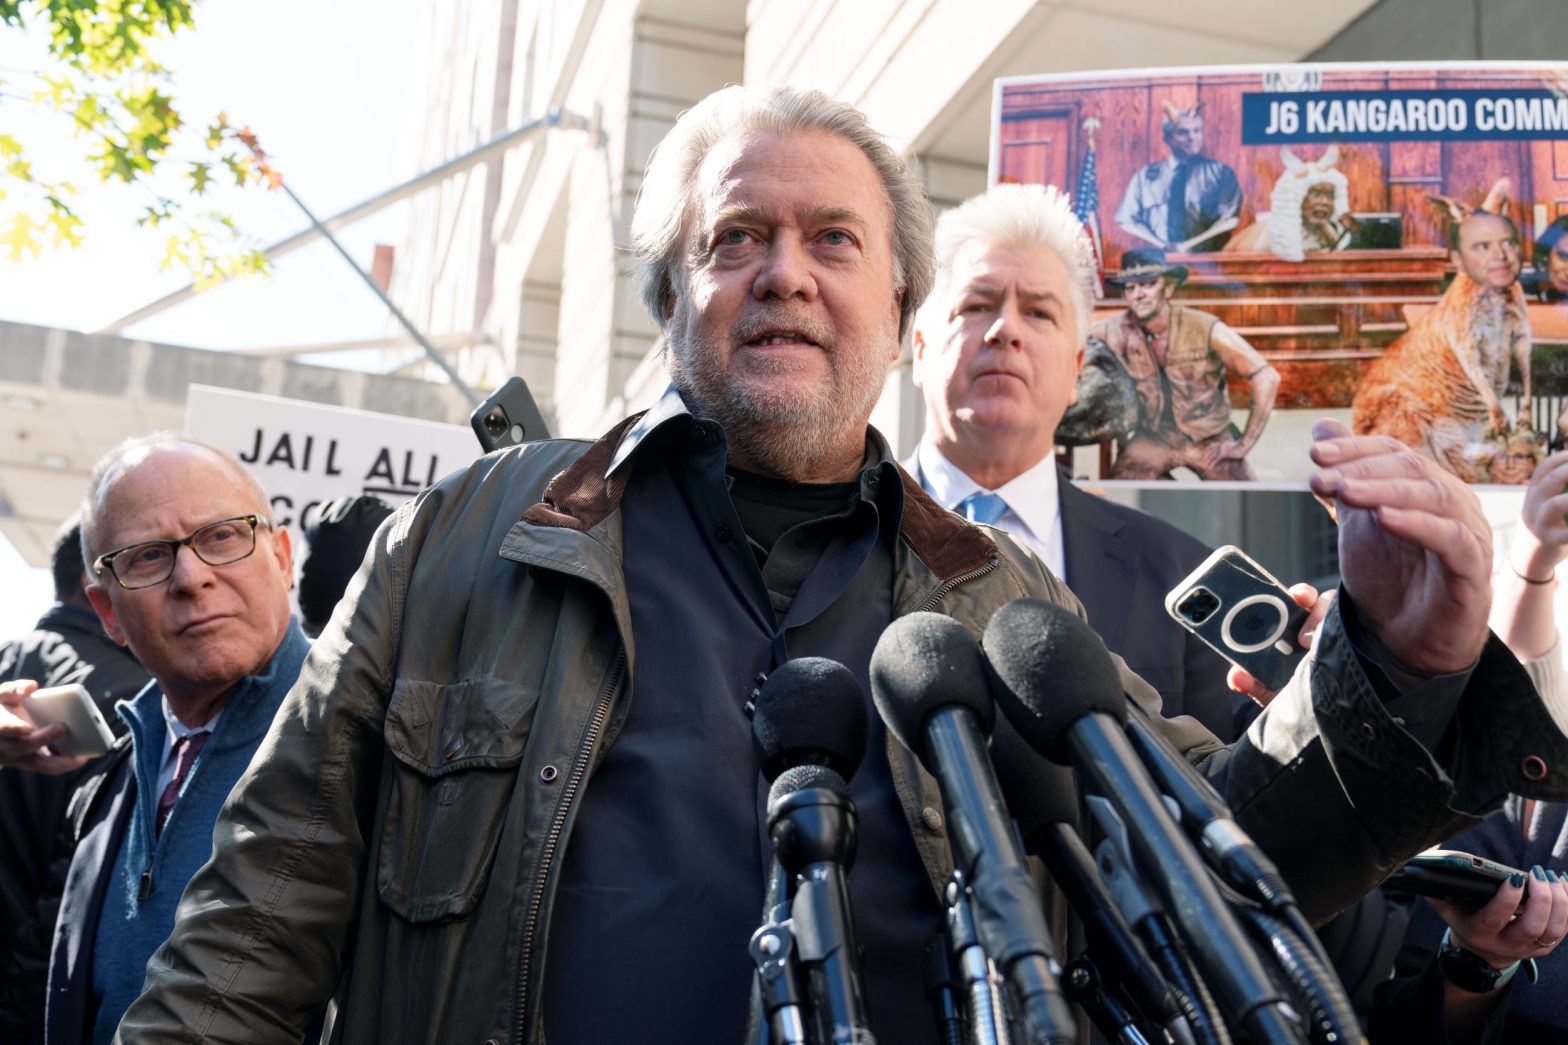 Steve Bannon Sentenced to Jail for Contempt of Congress